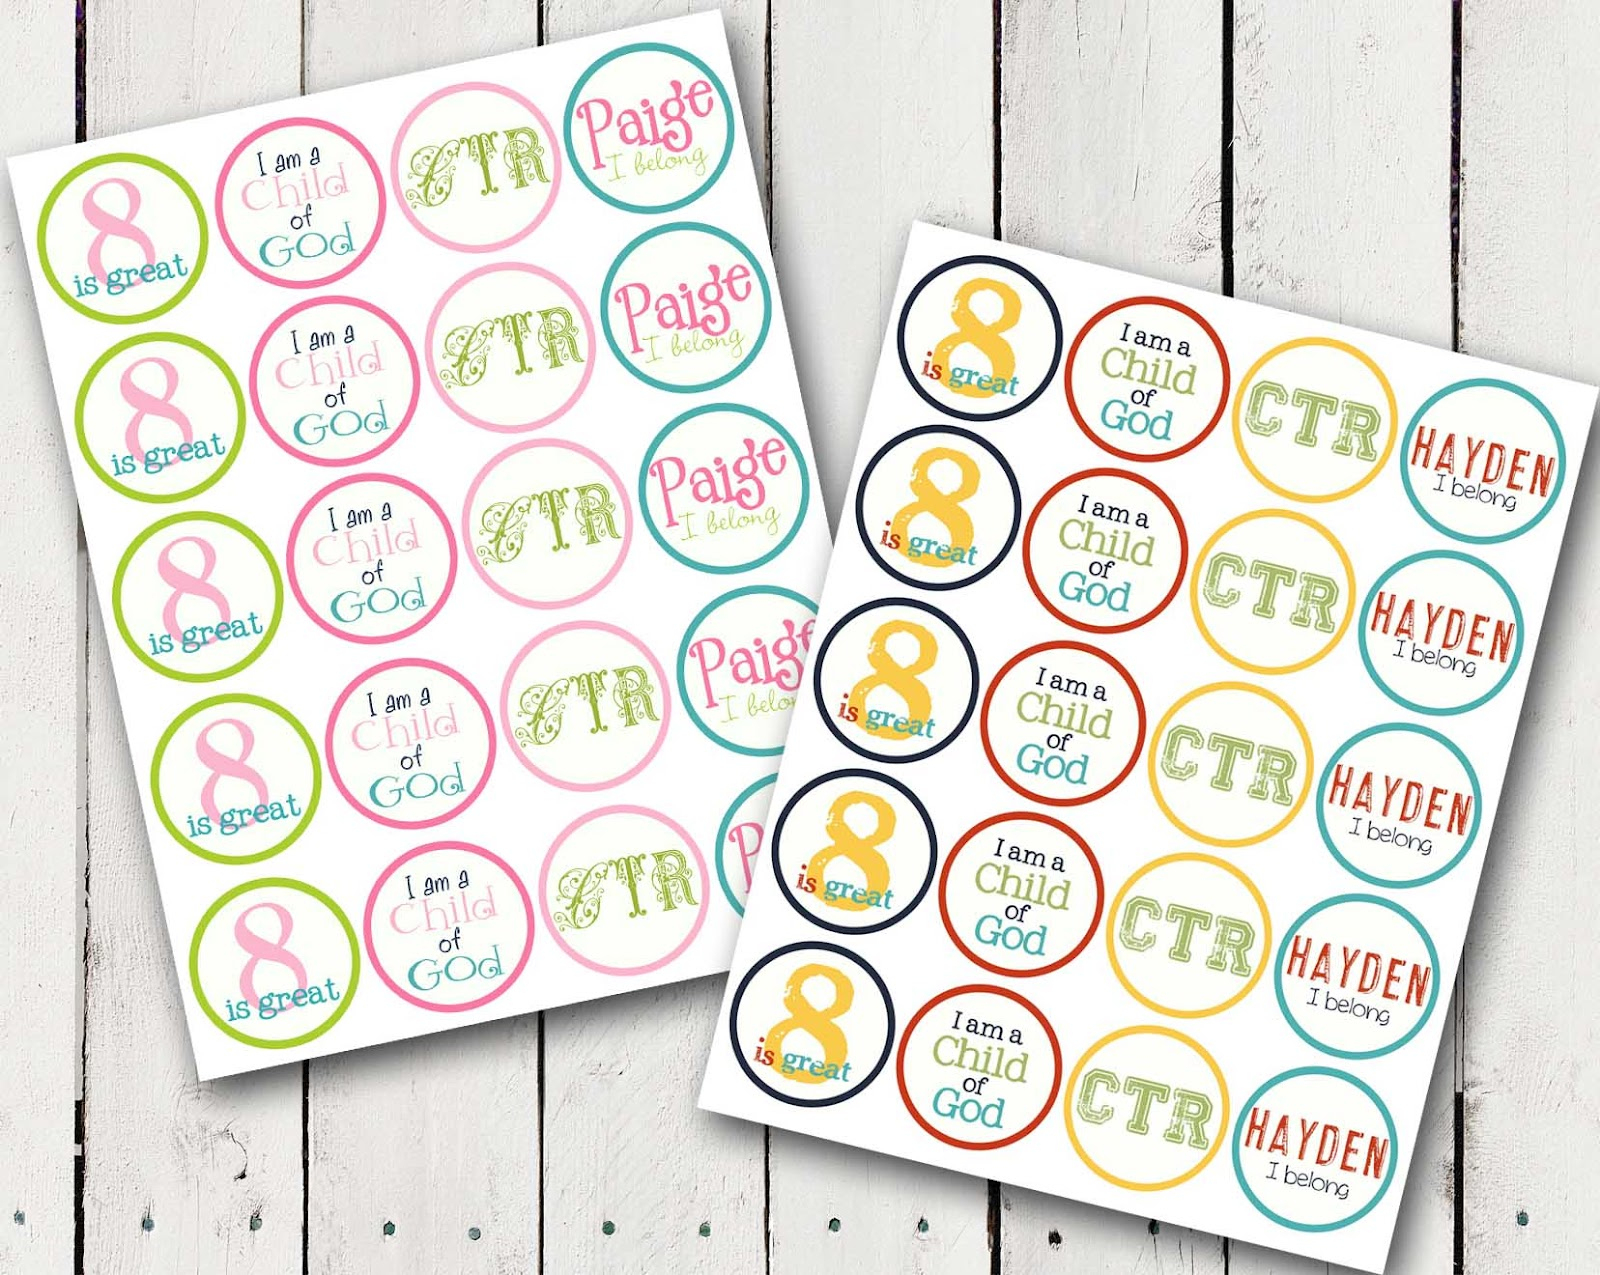 A Pocket Full Of Lds Prints: Ctr Cupcake Toppers - Free Diy Printable - Baptism Cupcake Toppers Printable Free